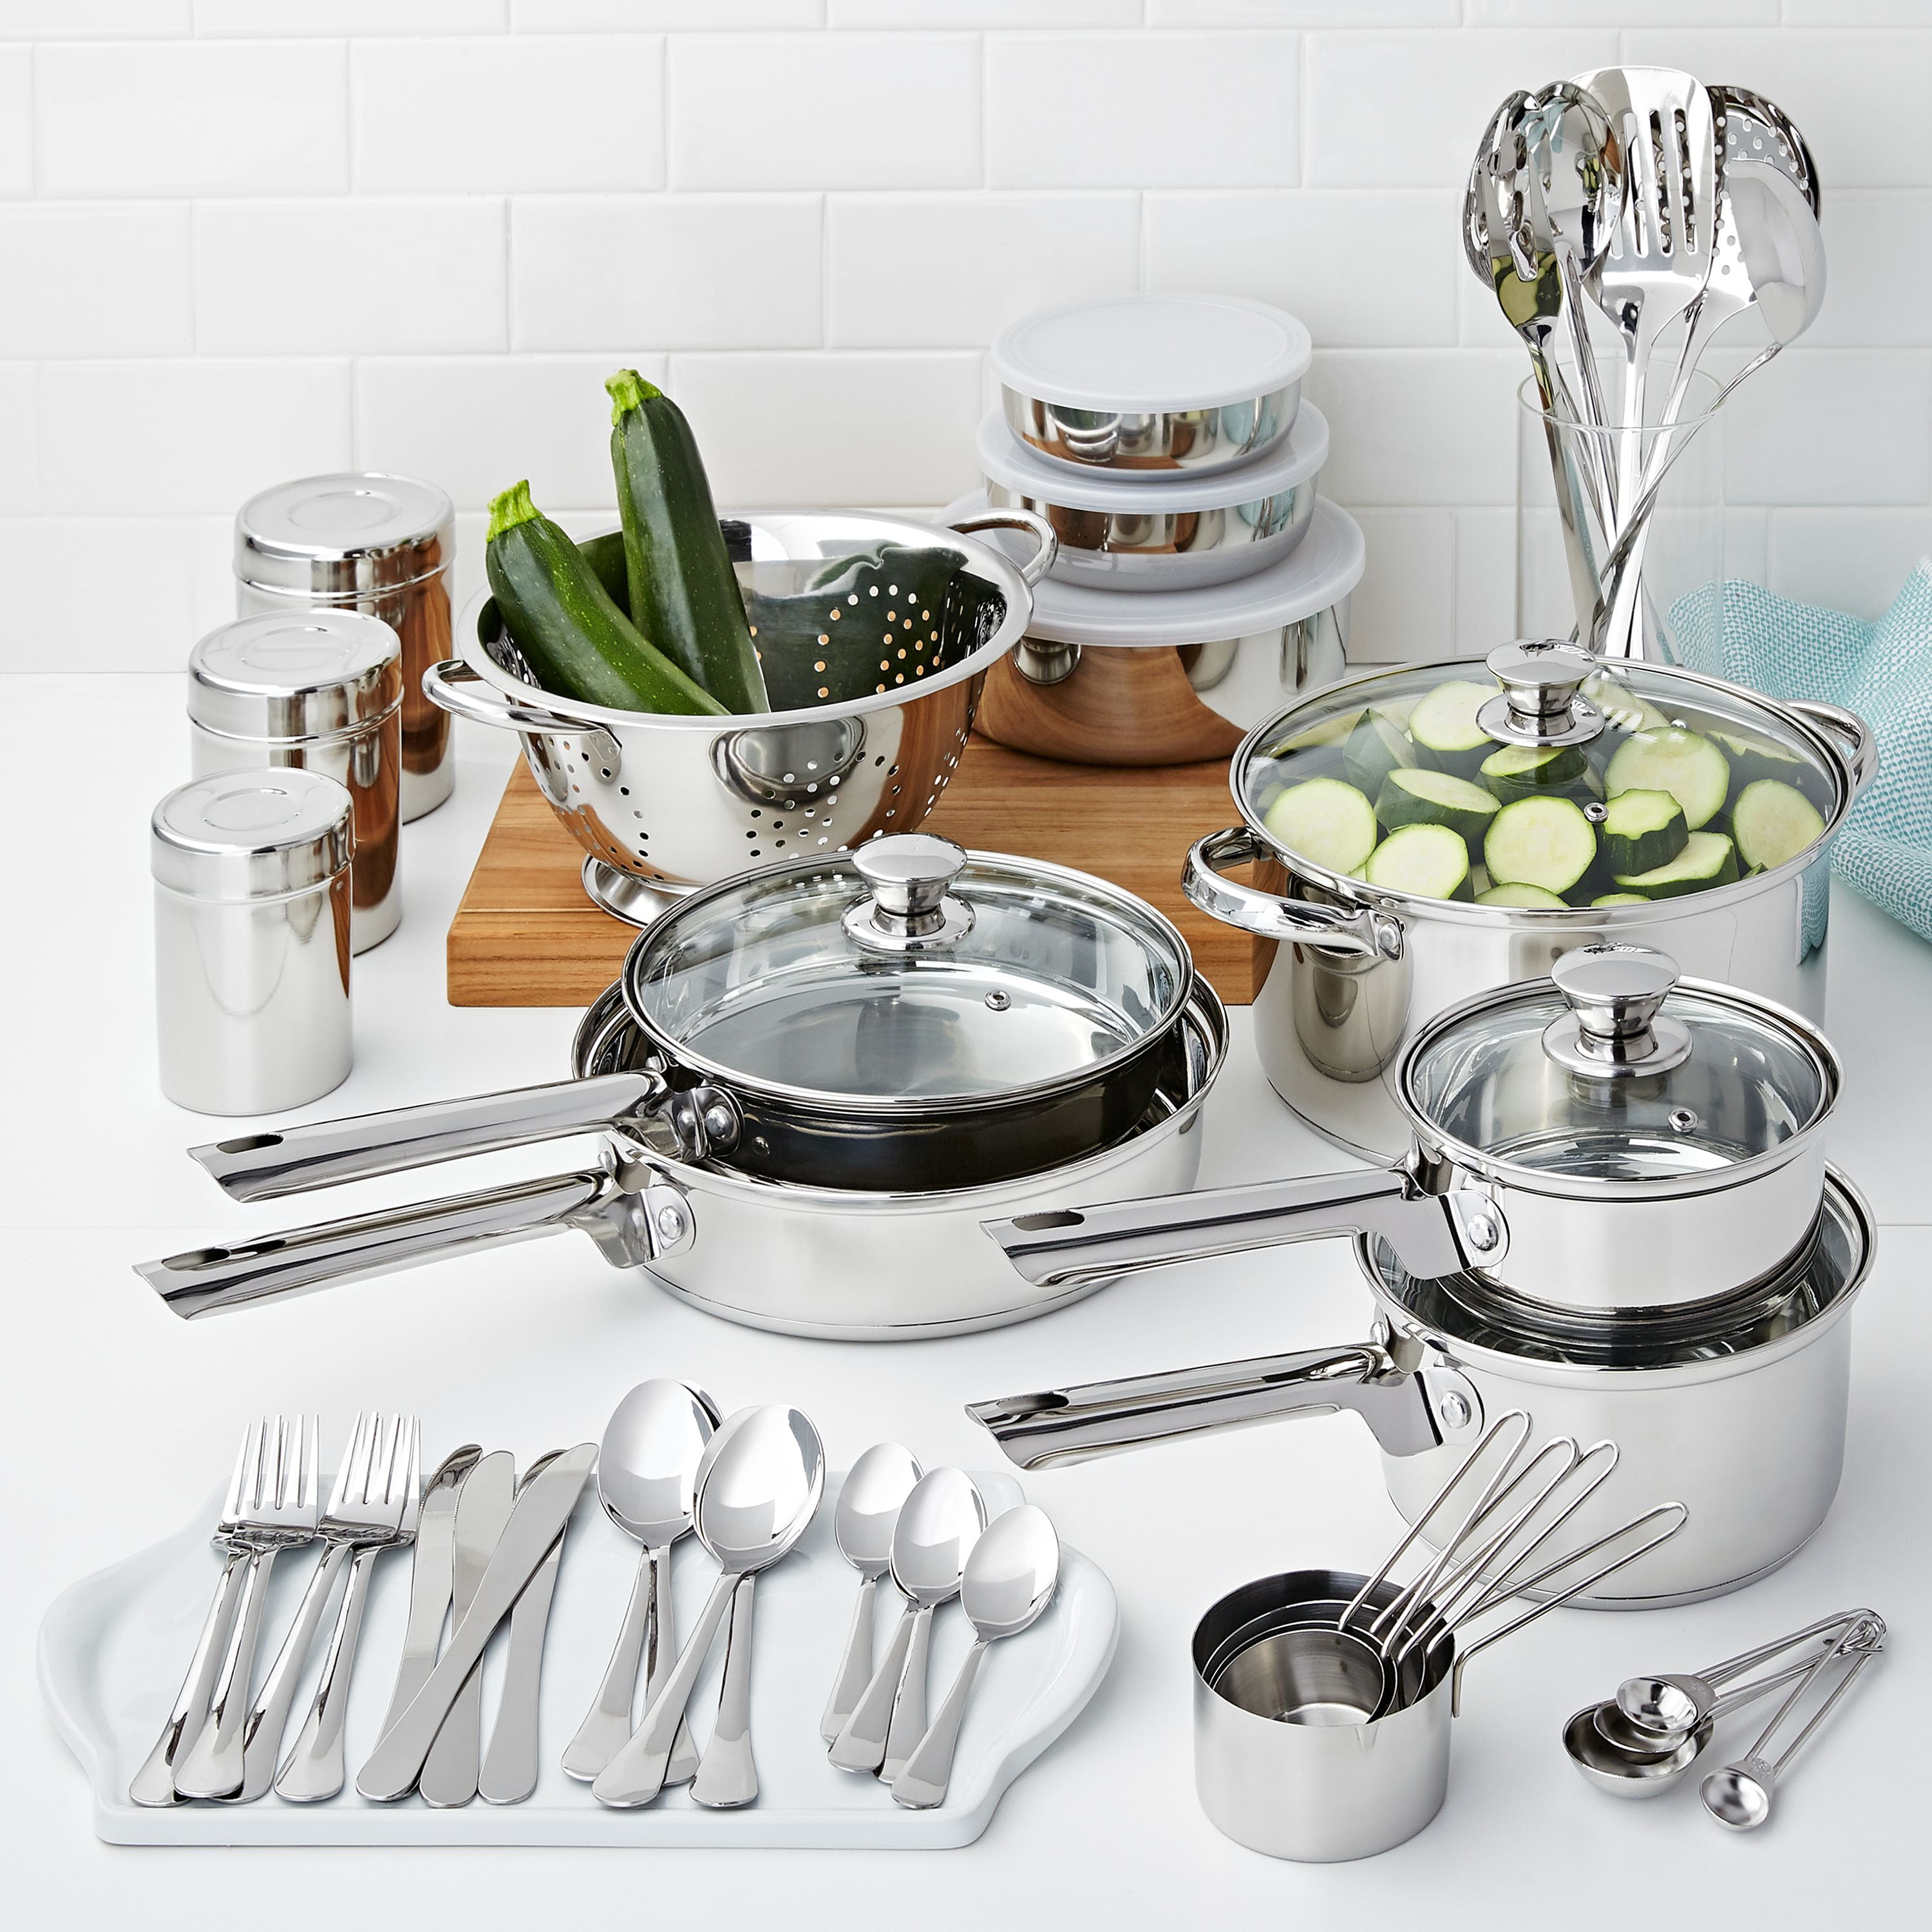 Mainstays Stainless Steel 52 Piece Cookware Set, with Kitchen Tools and .